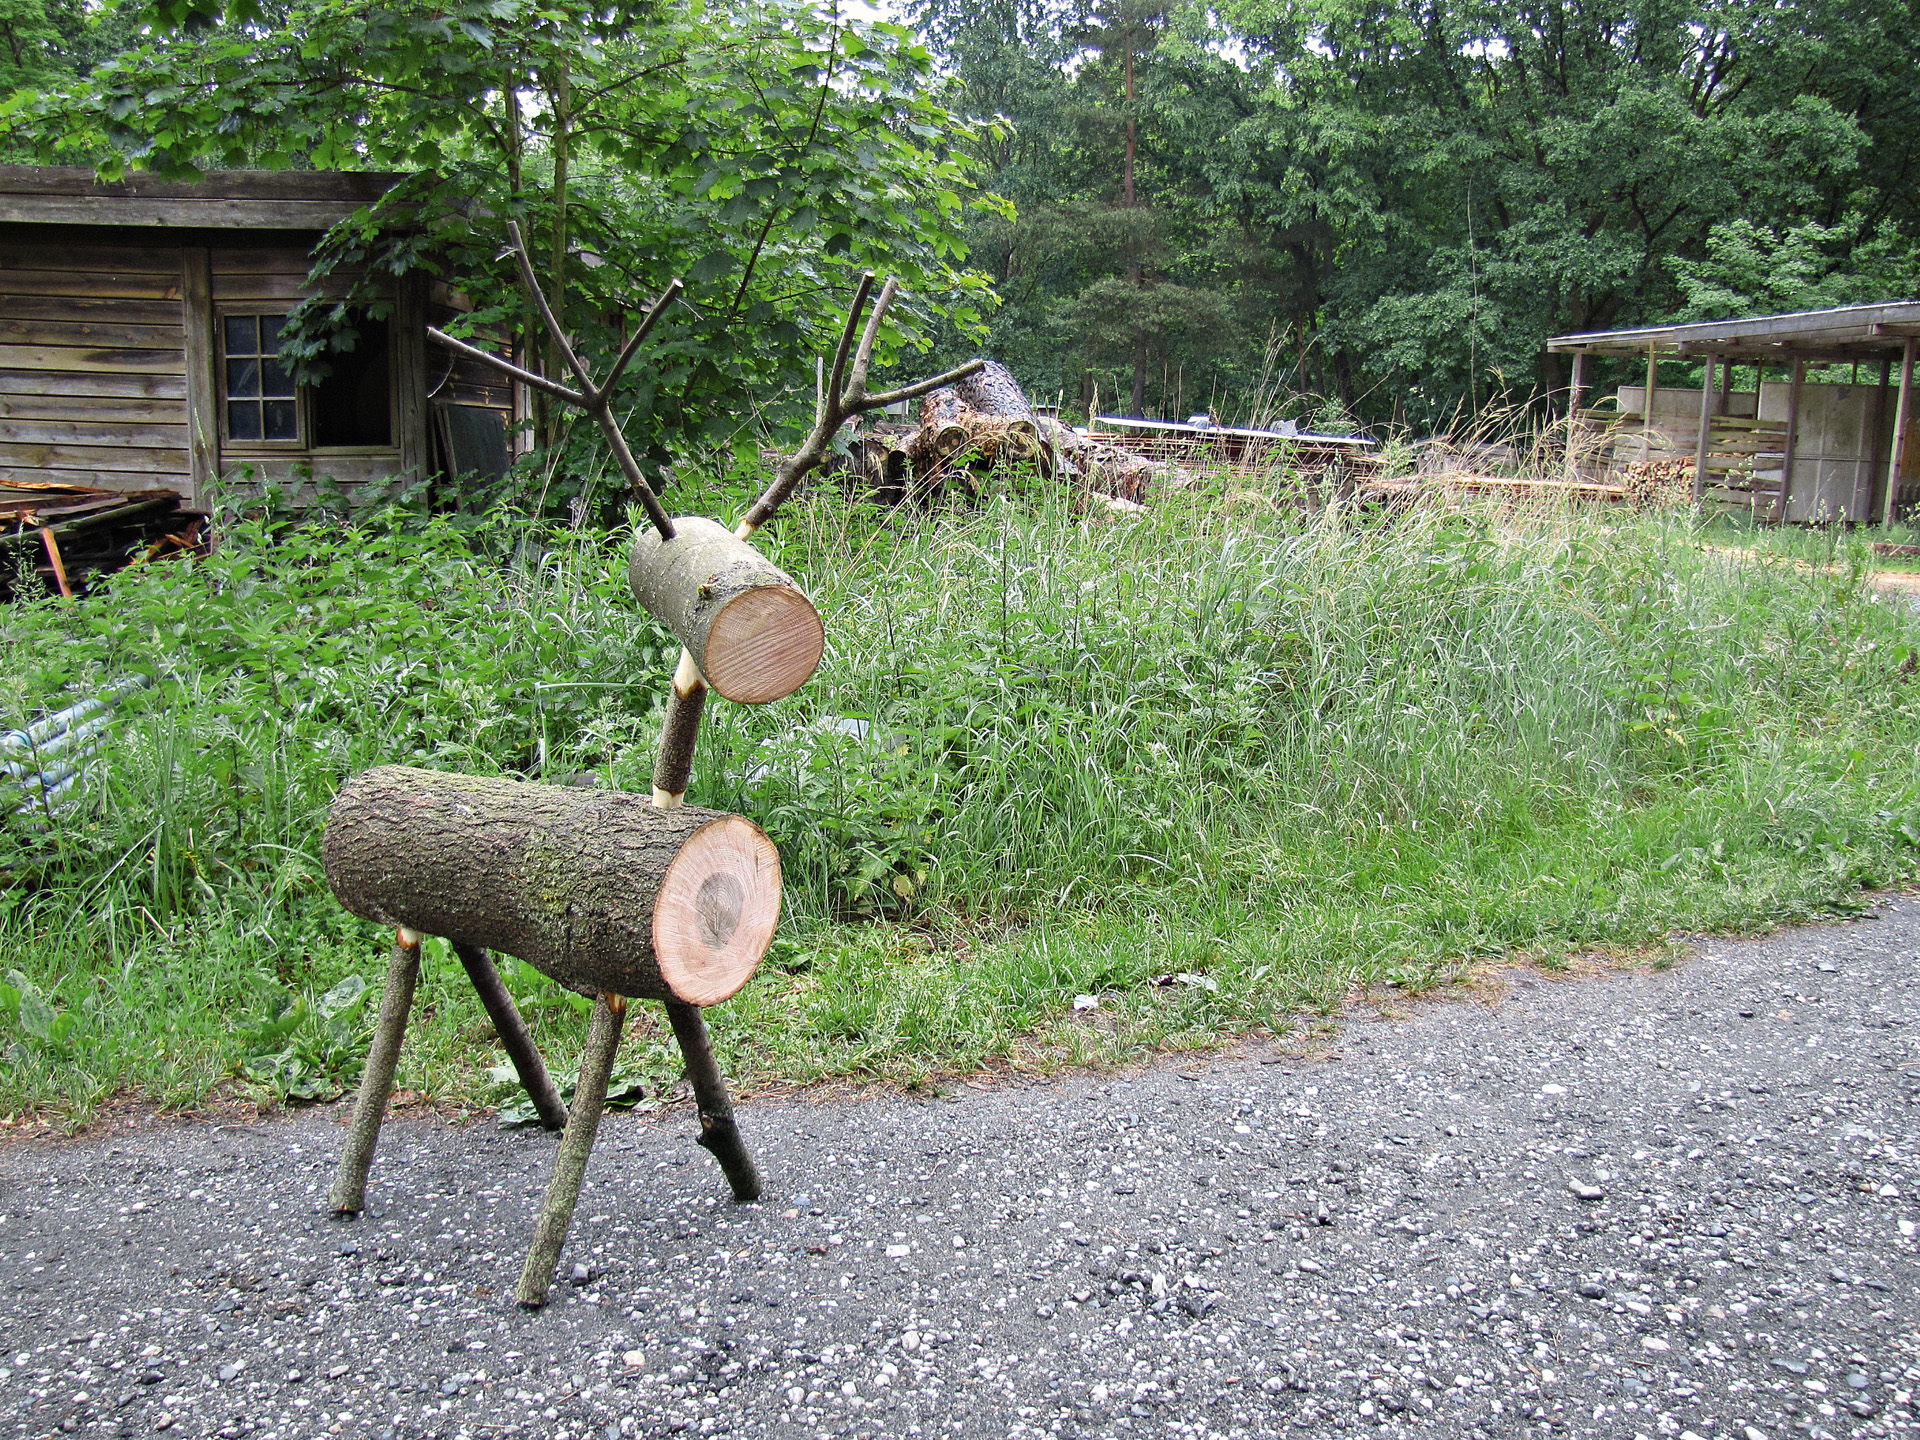 DIY log reindeer in front of green grass and shed